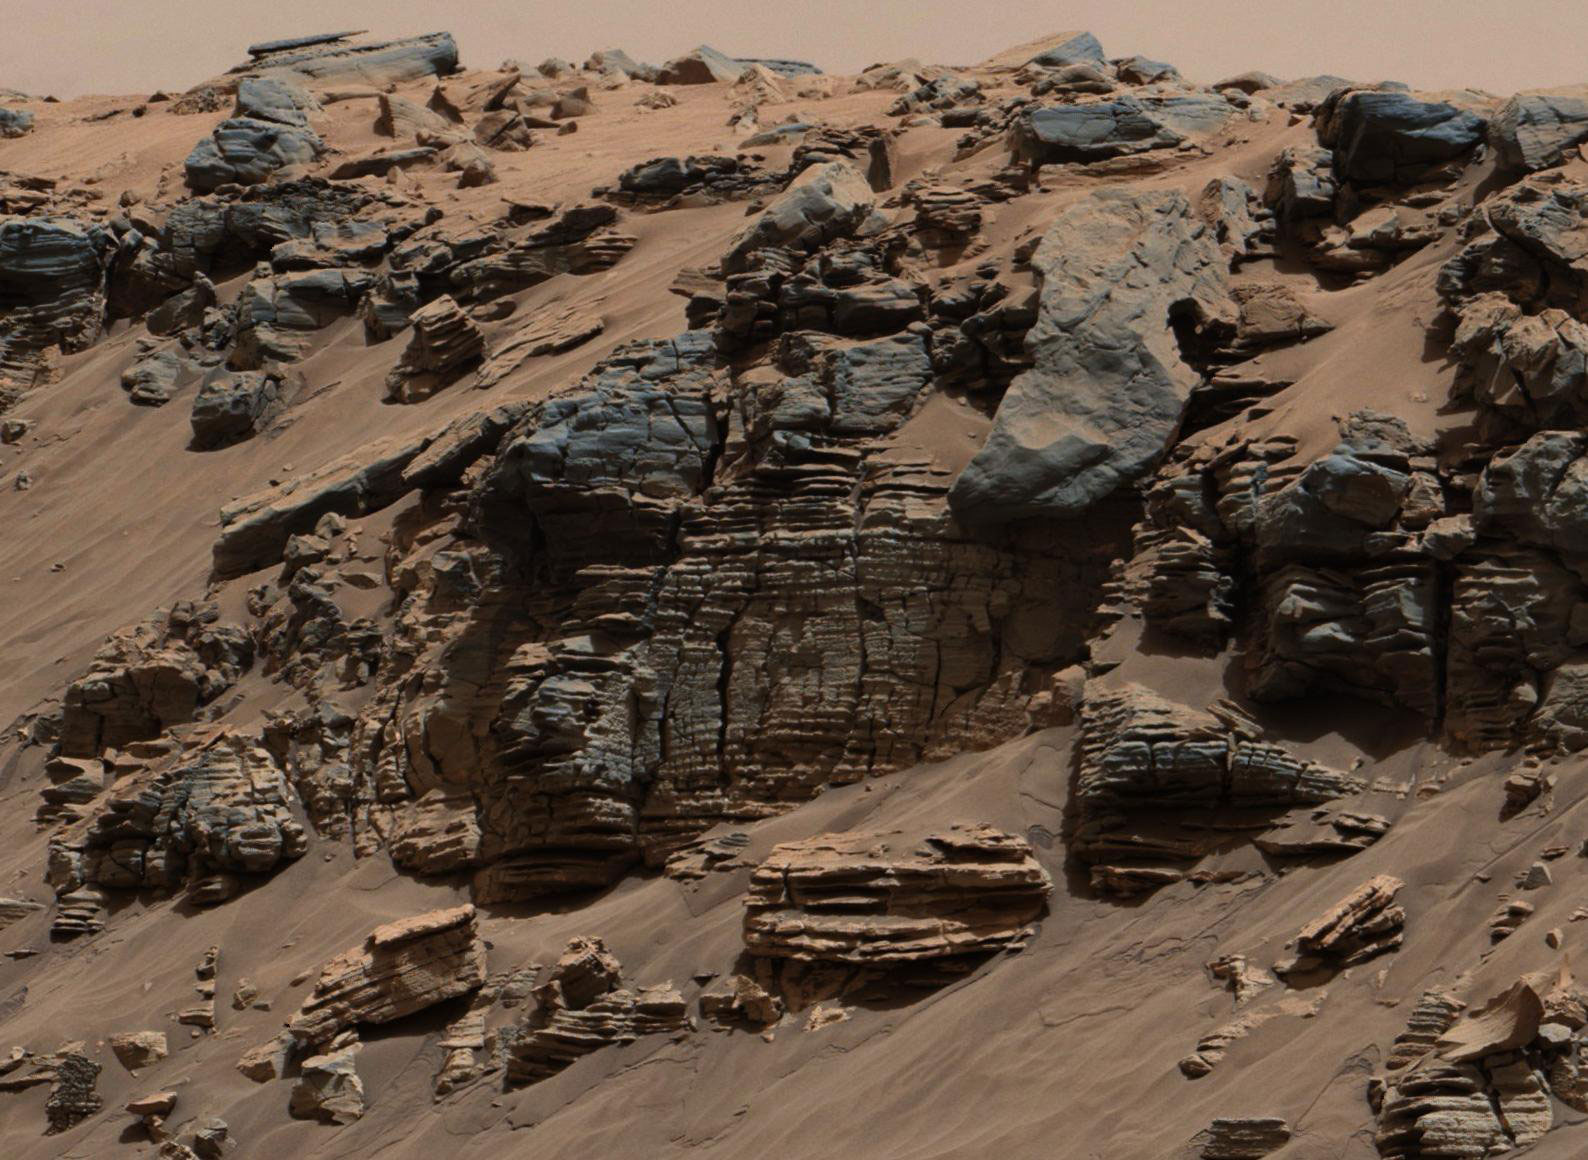 This evenly layered rock photographed by the Mast Camera (Mastcam) on NASA's Curiosity Mars Rover shows a pattern typical of a lake-floor sedimentary deposit not far from where flowing water entered a lake.